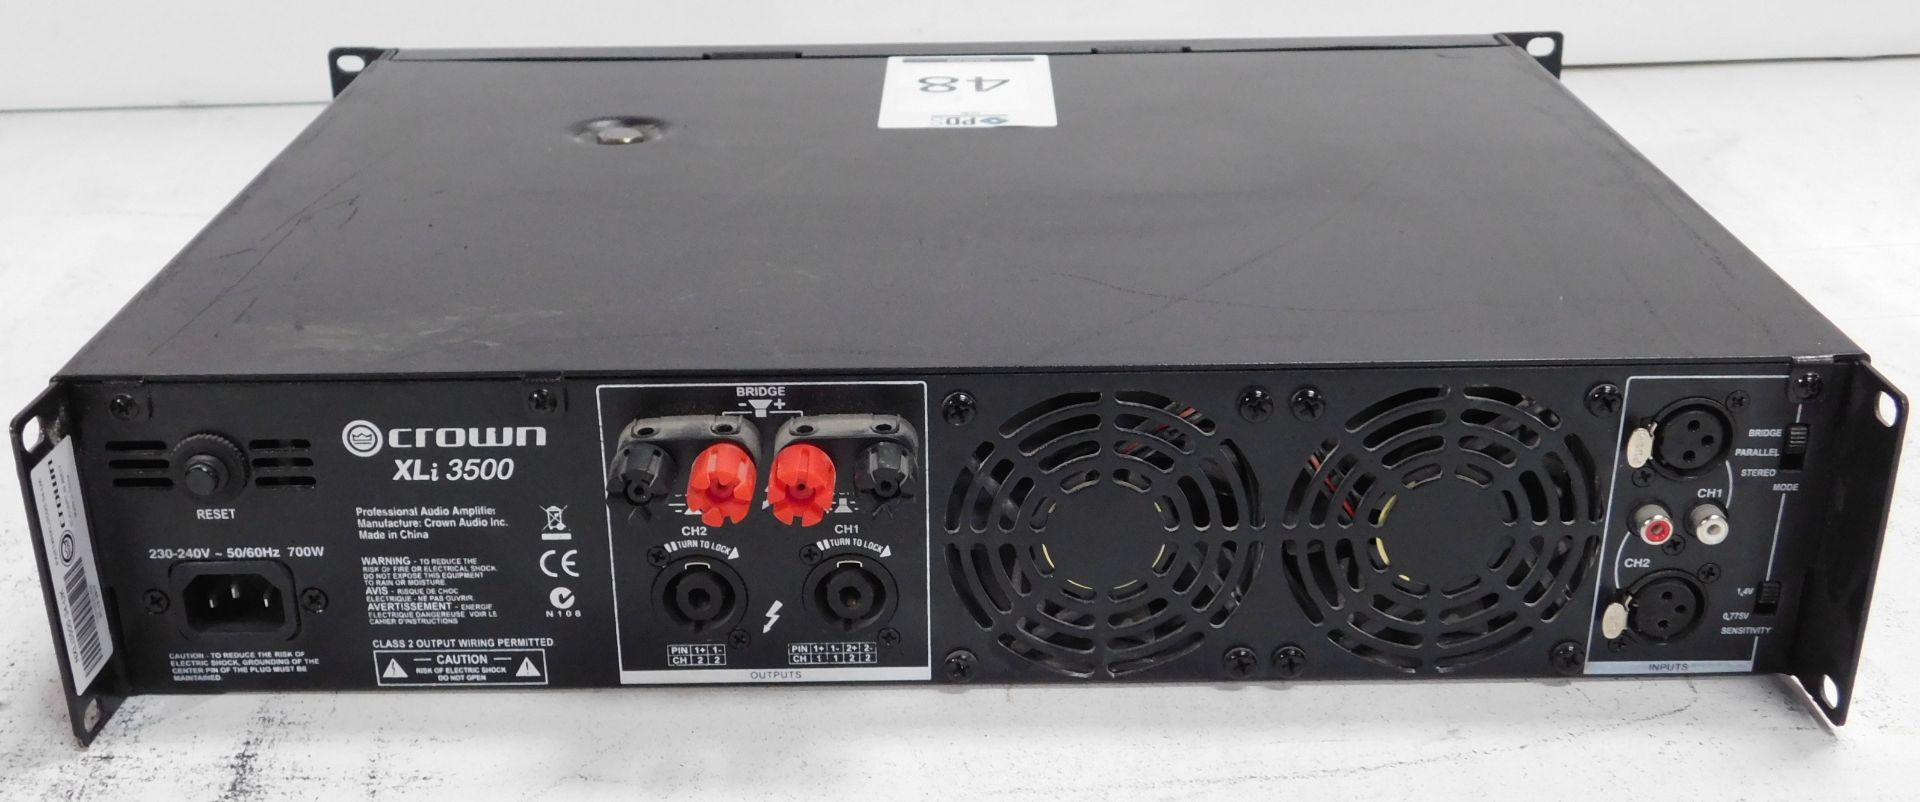 Crown Xli3500 Rack-Mount Power Amplifier (Location Brentwood. Please Refer to General Notes) - Image 2 of 2